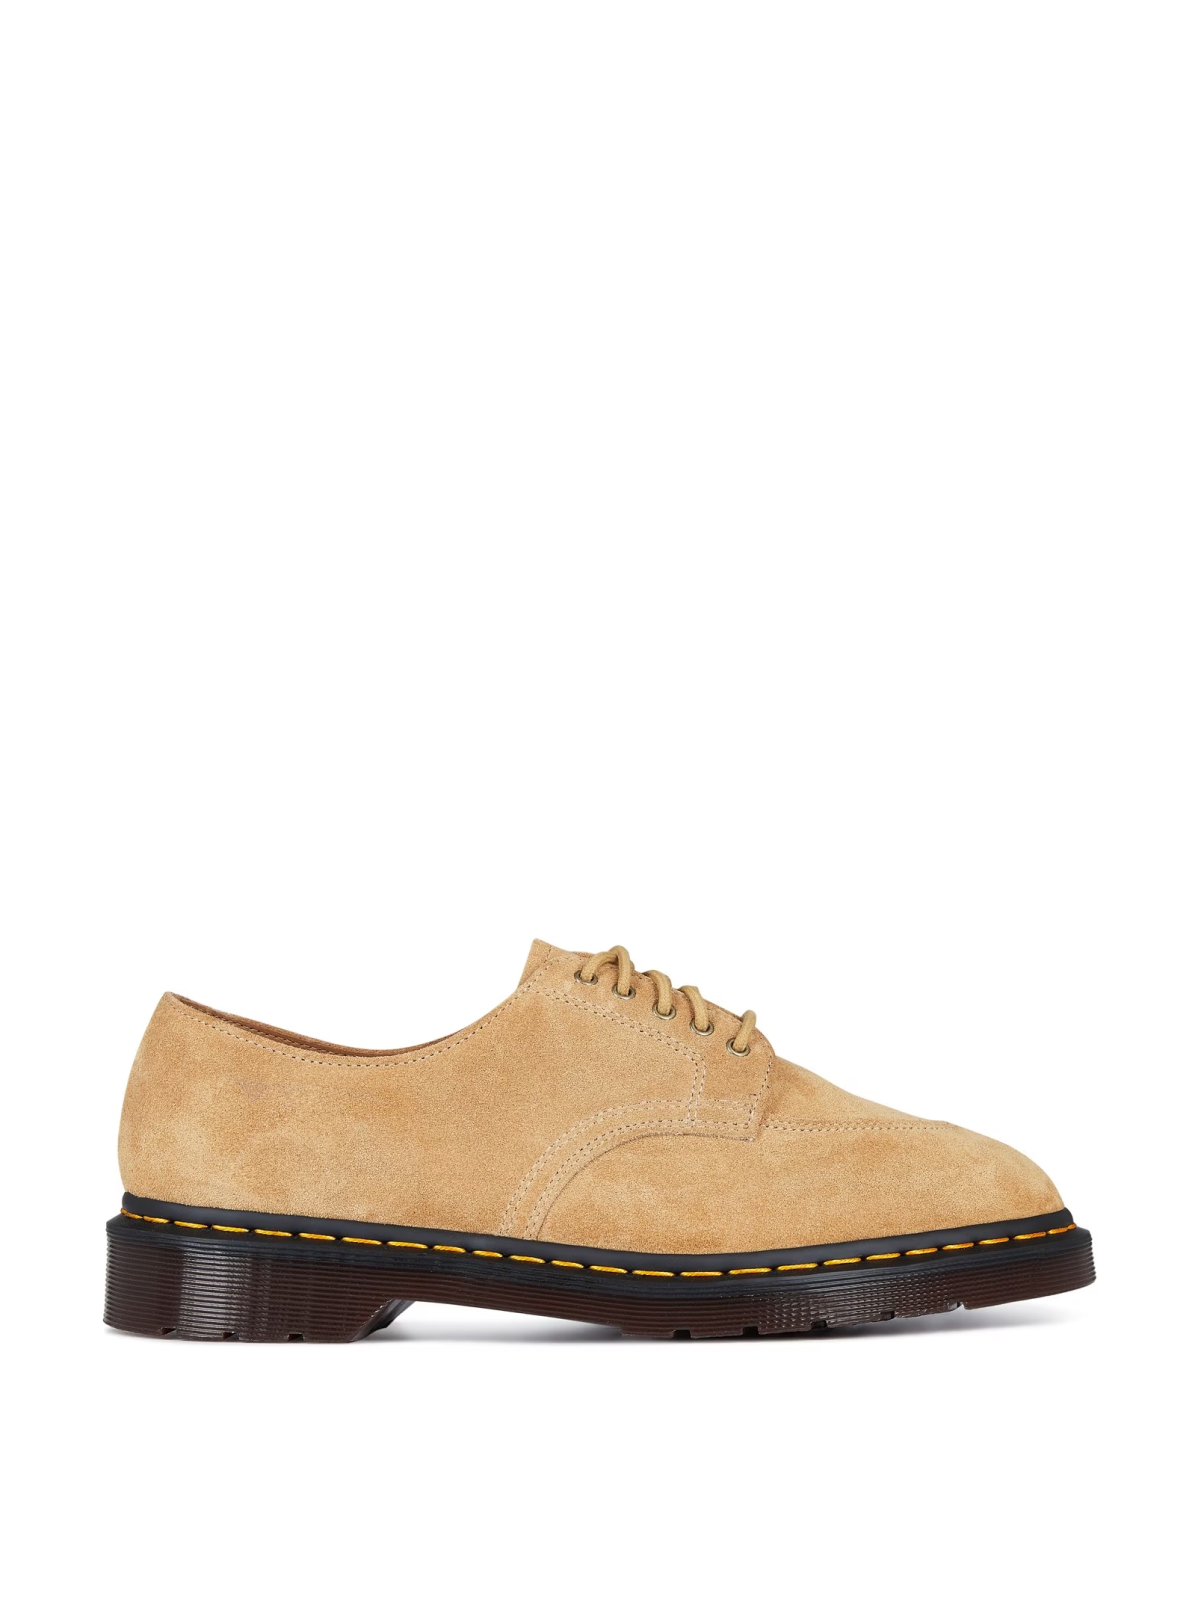 2046 Repello Sand Lace-up Derby